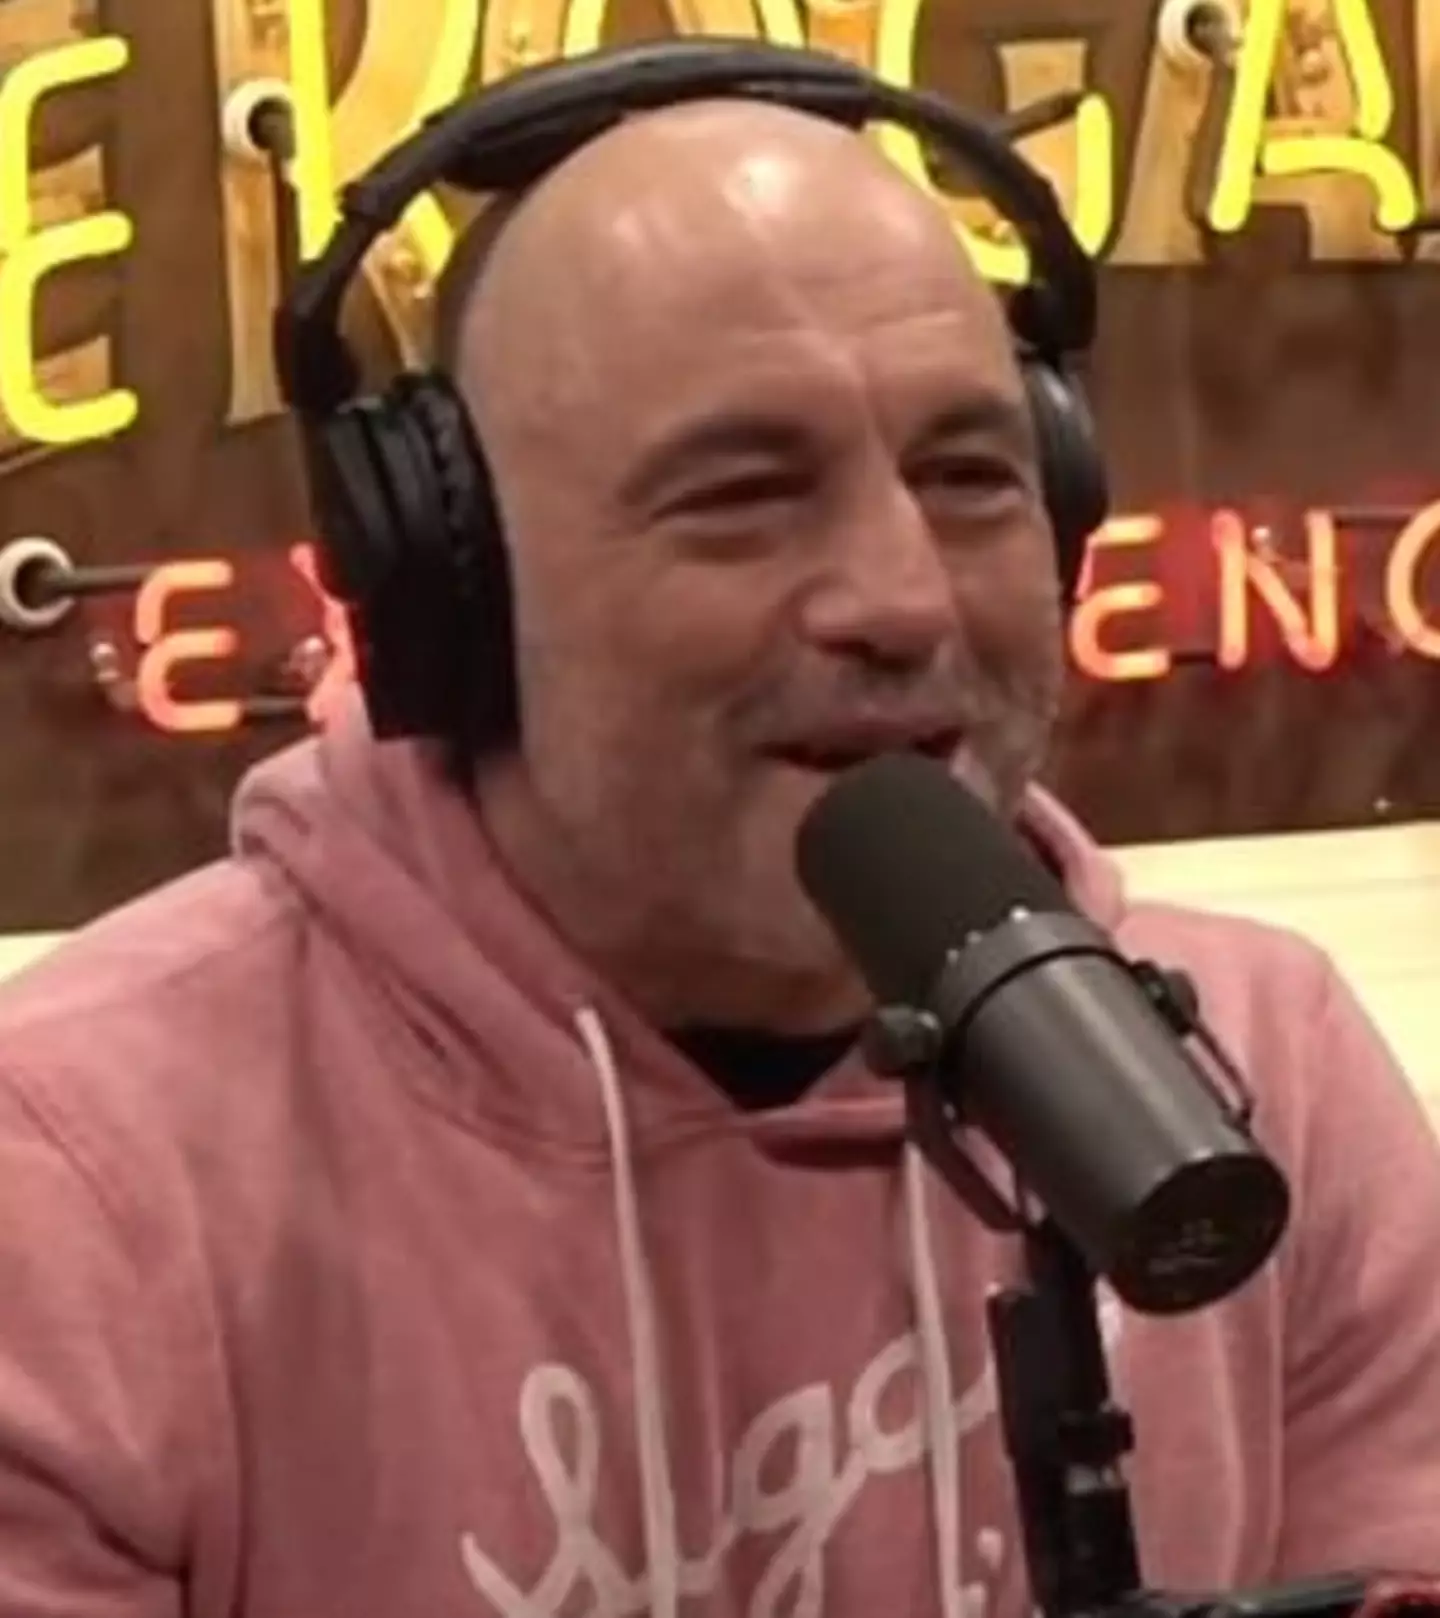 Joe Rogan is in fact a different person to Dana White.